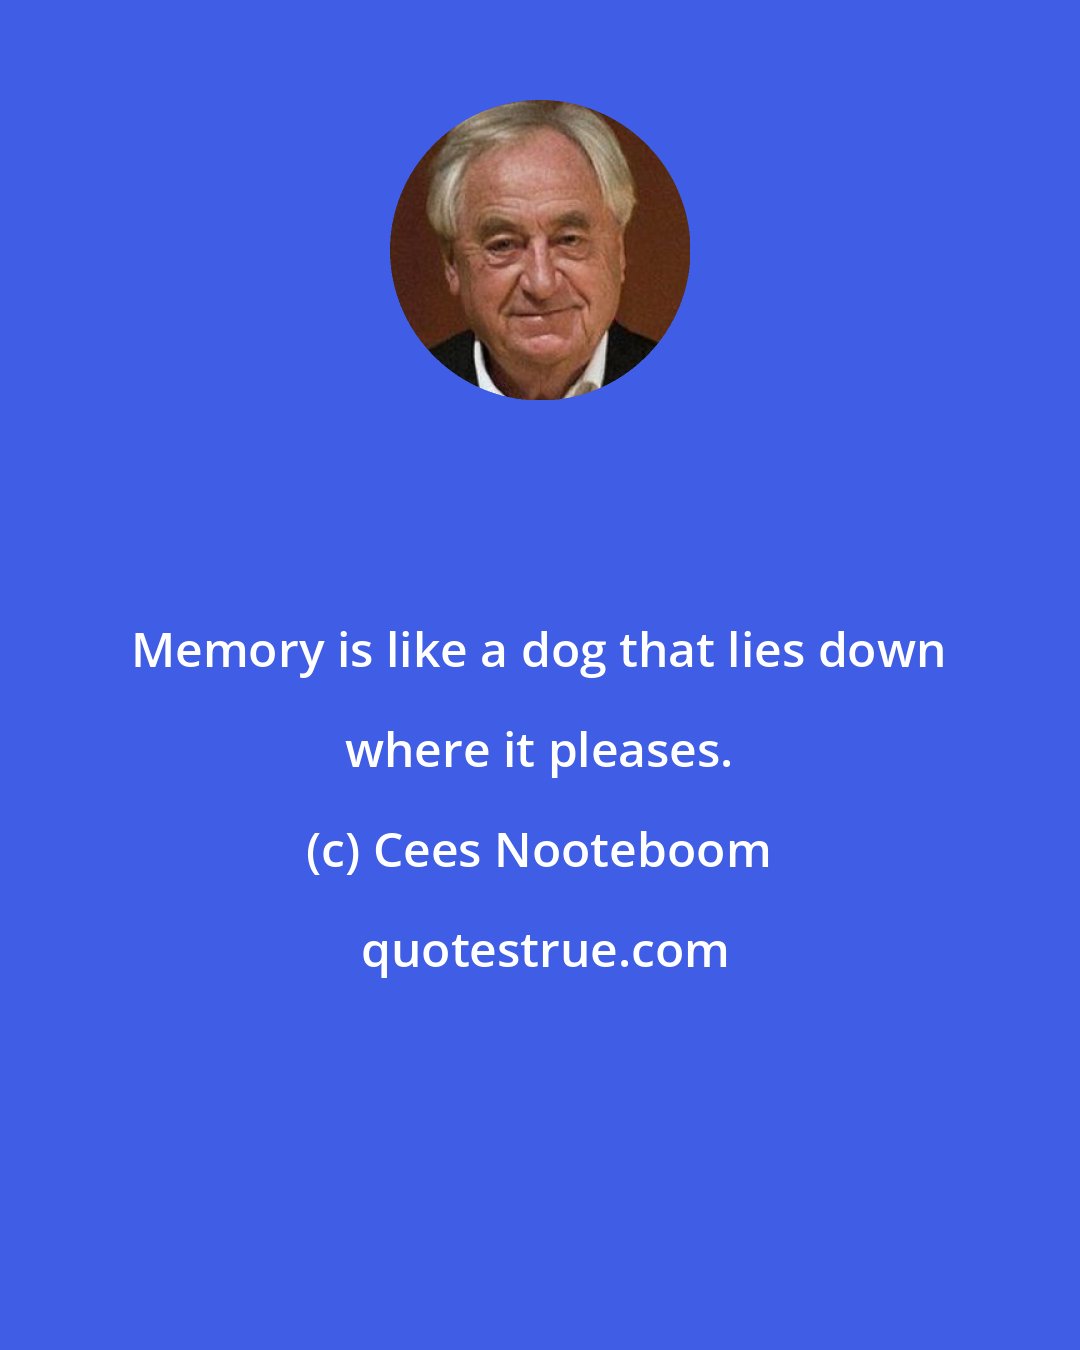 Cees Nooteboom: Memory is like a dog that lies down where it pleases.